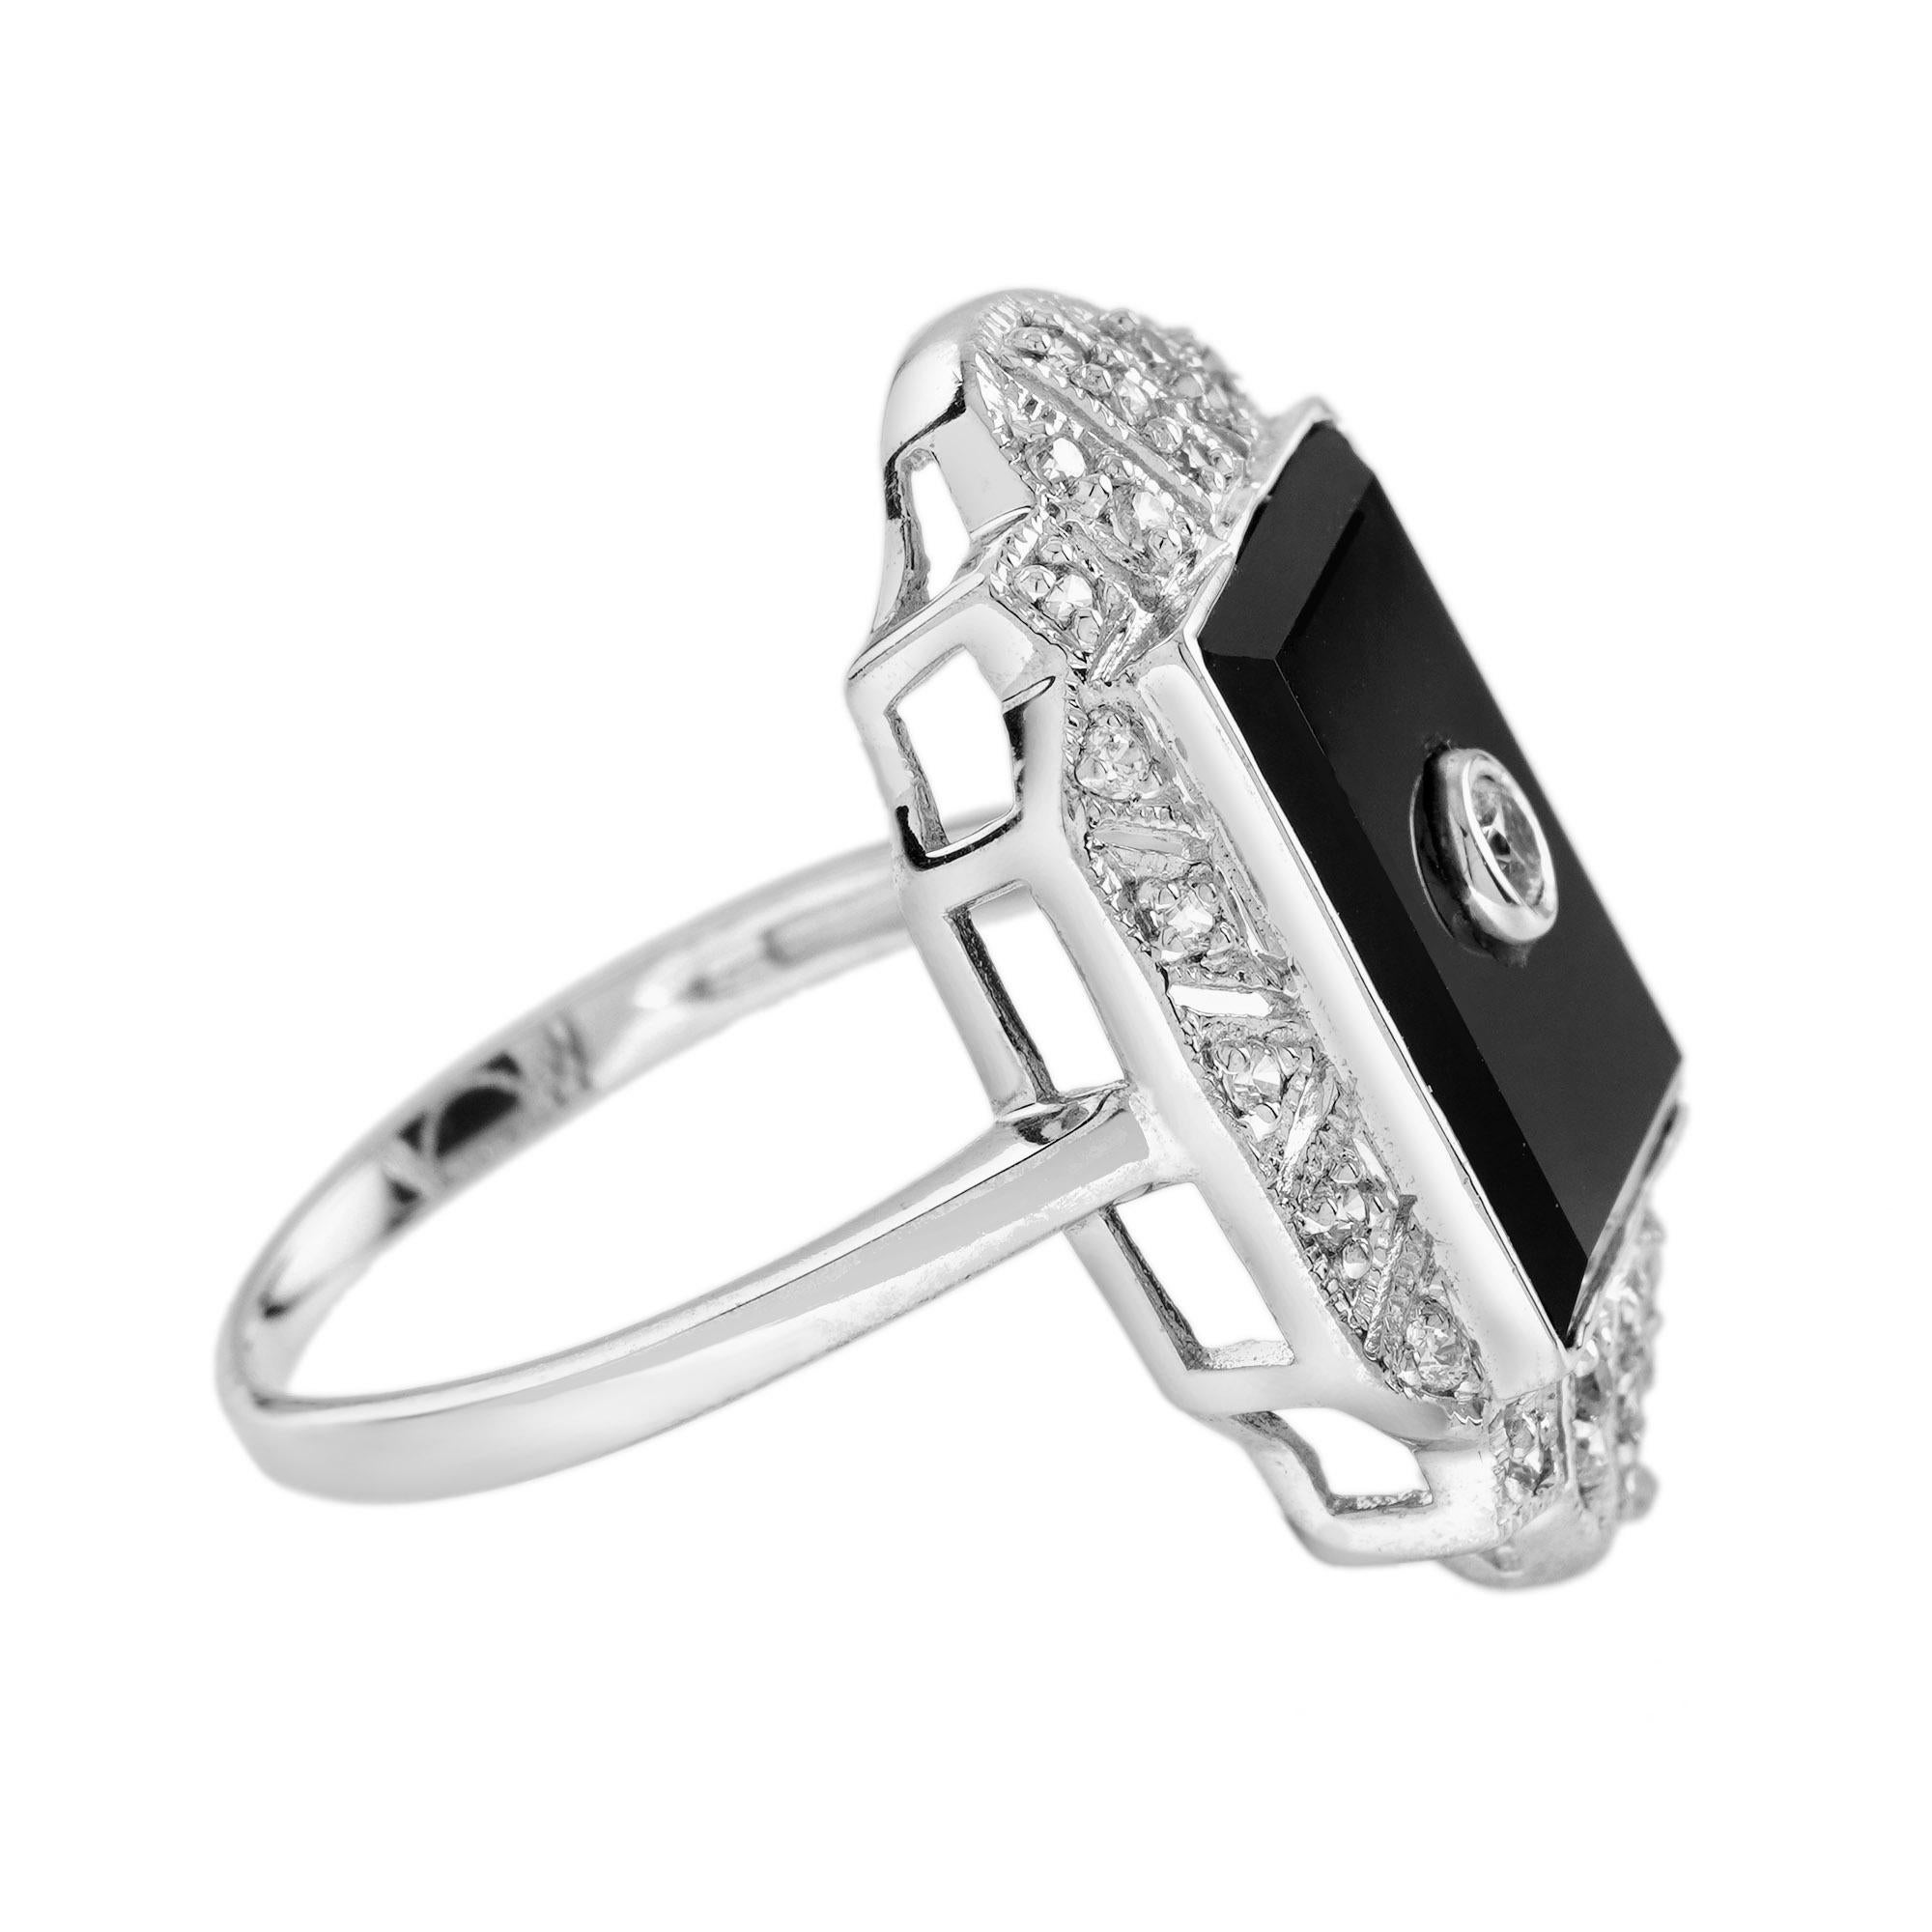 For Sale:  Diamond and Onyx Art Deco Style Dinner Ring in 14K White Gold 4